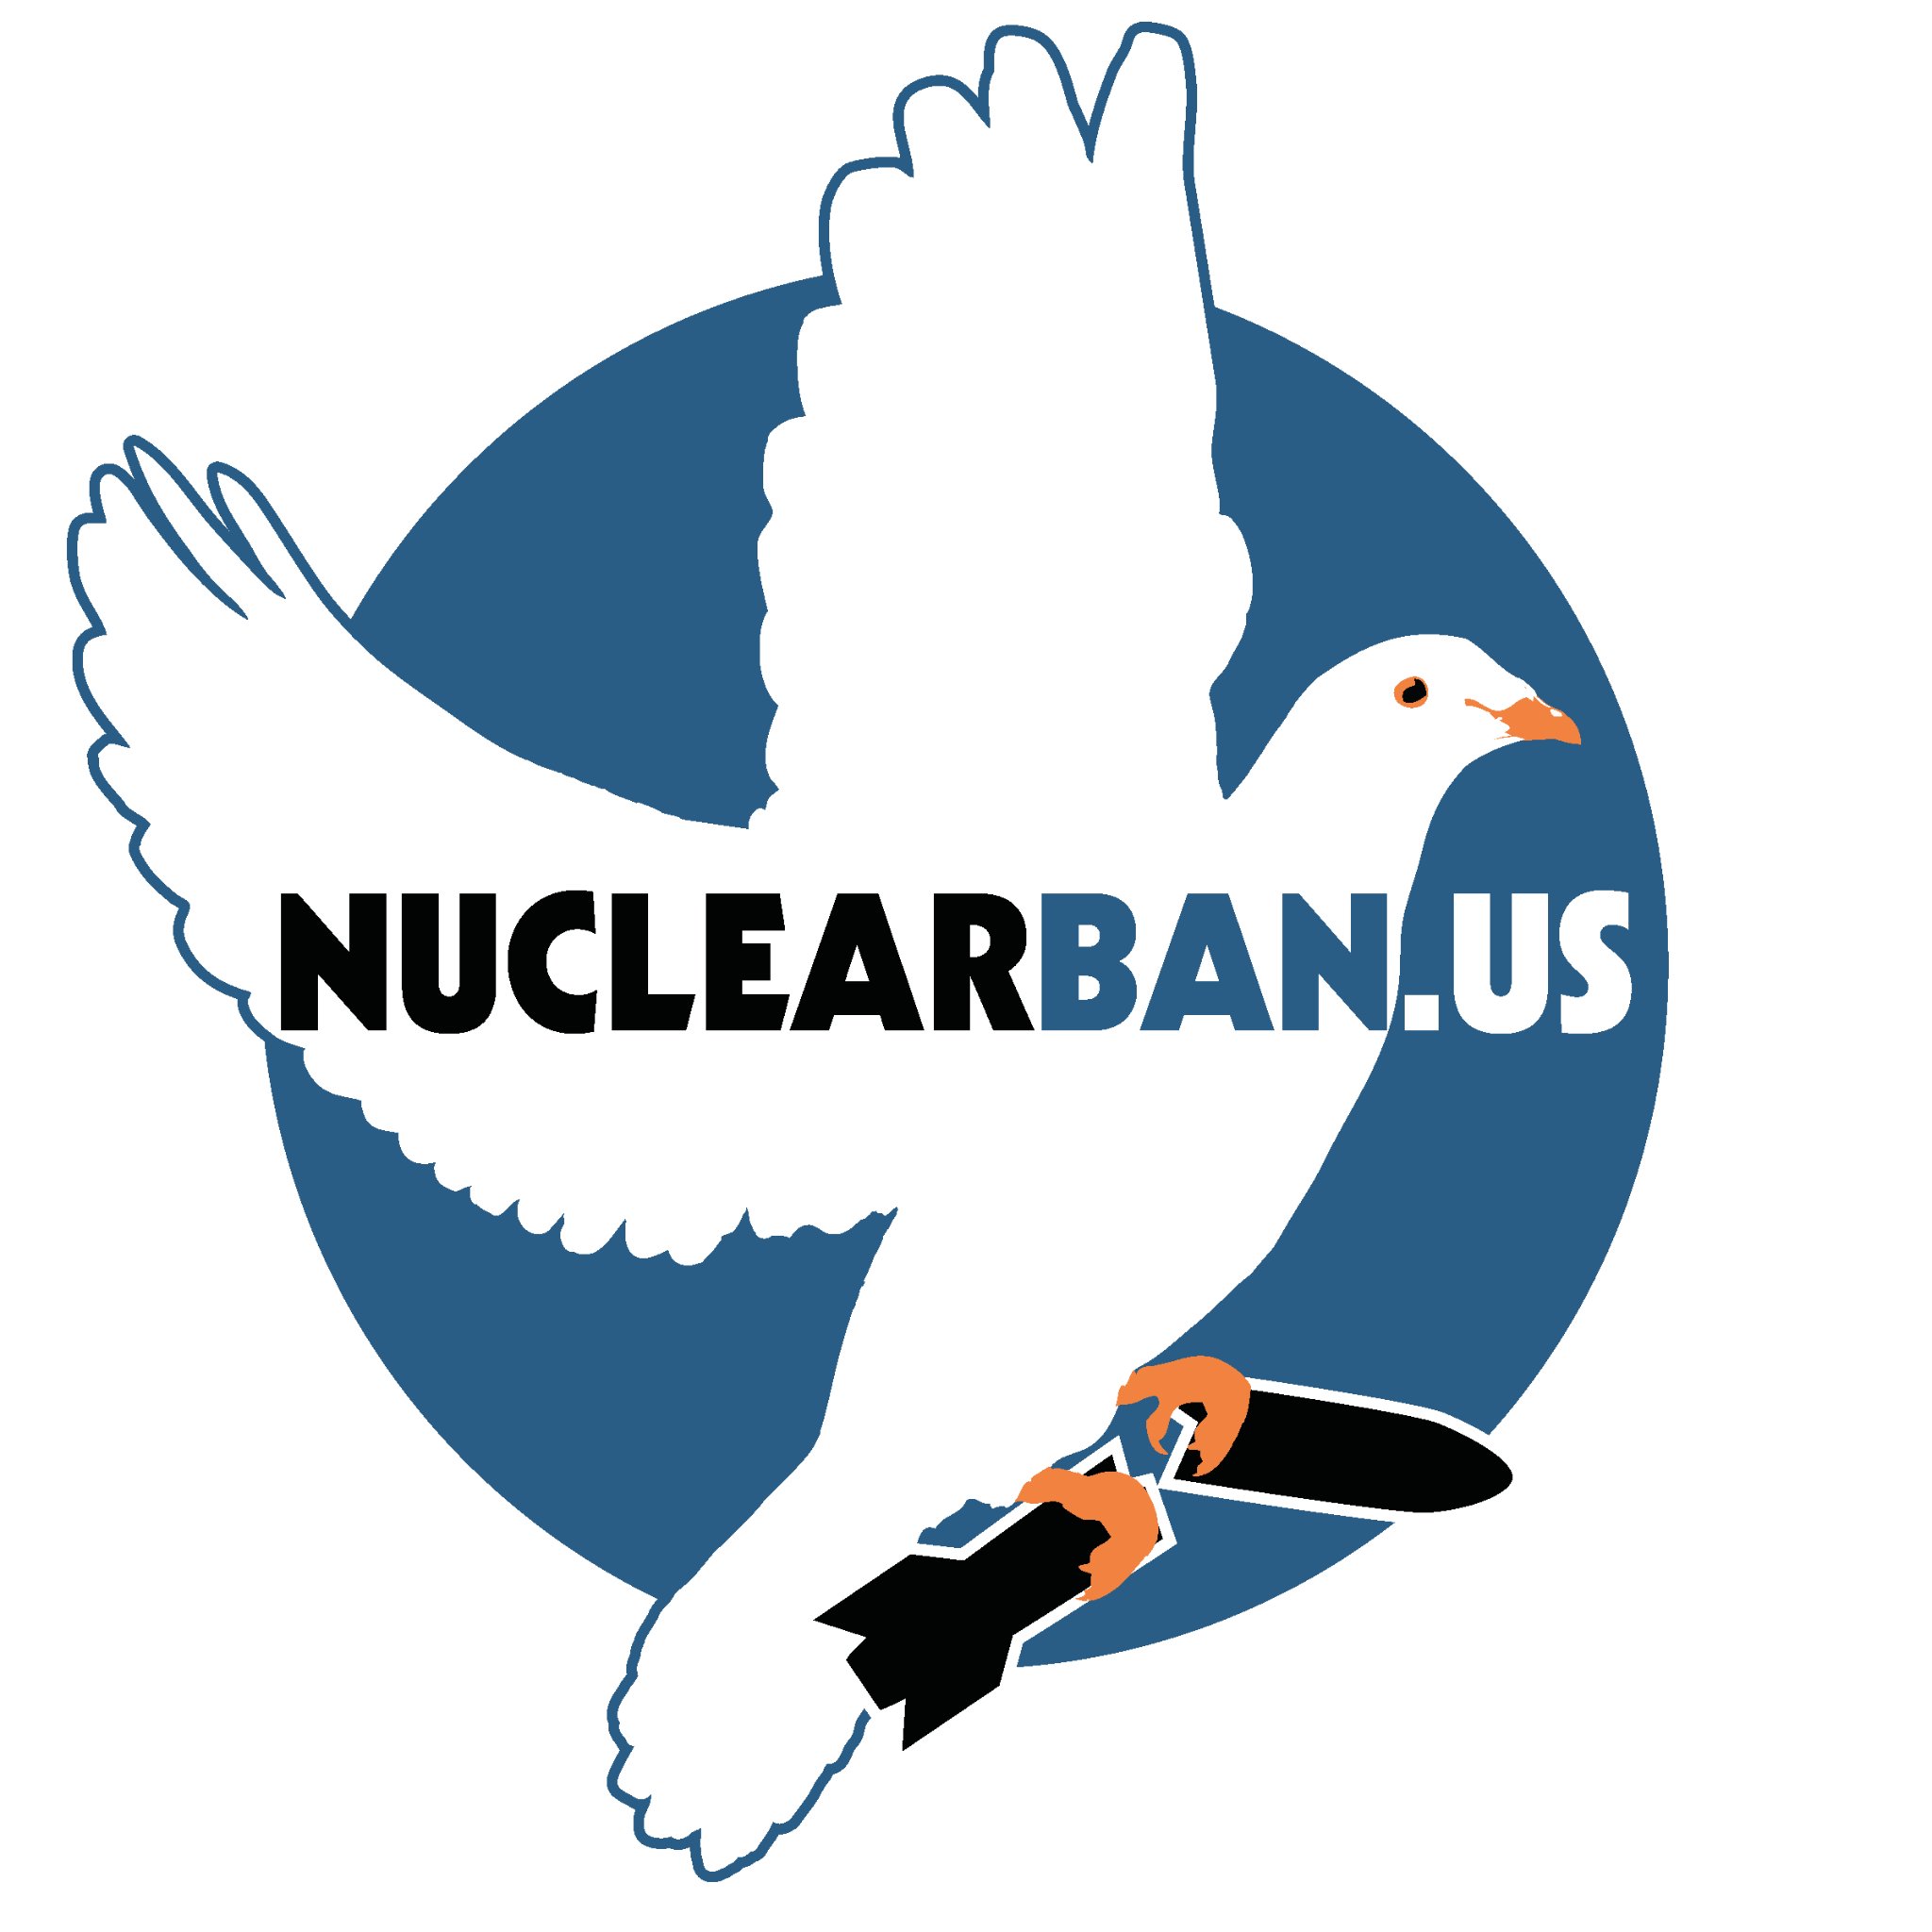 Committed to achieving a world free from nuclear weapons, by getting the US and other nuclear nations to sign, ratify, and implement the Nuclear Ban Treaty.